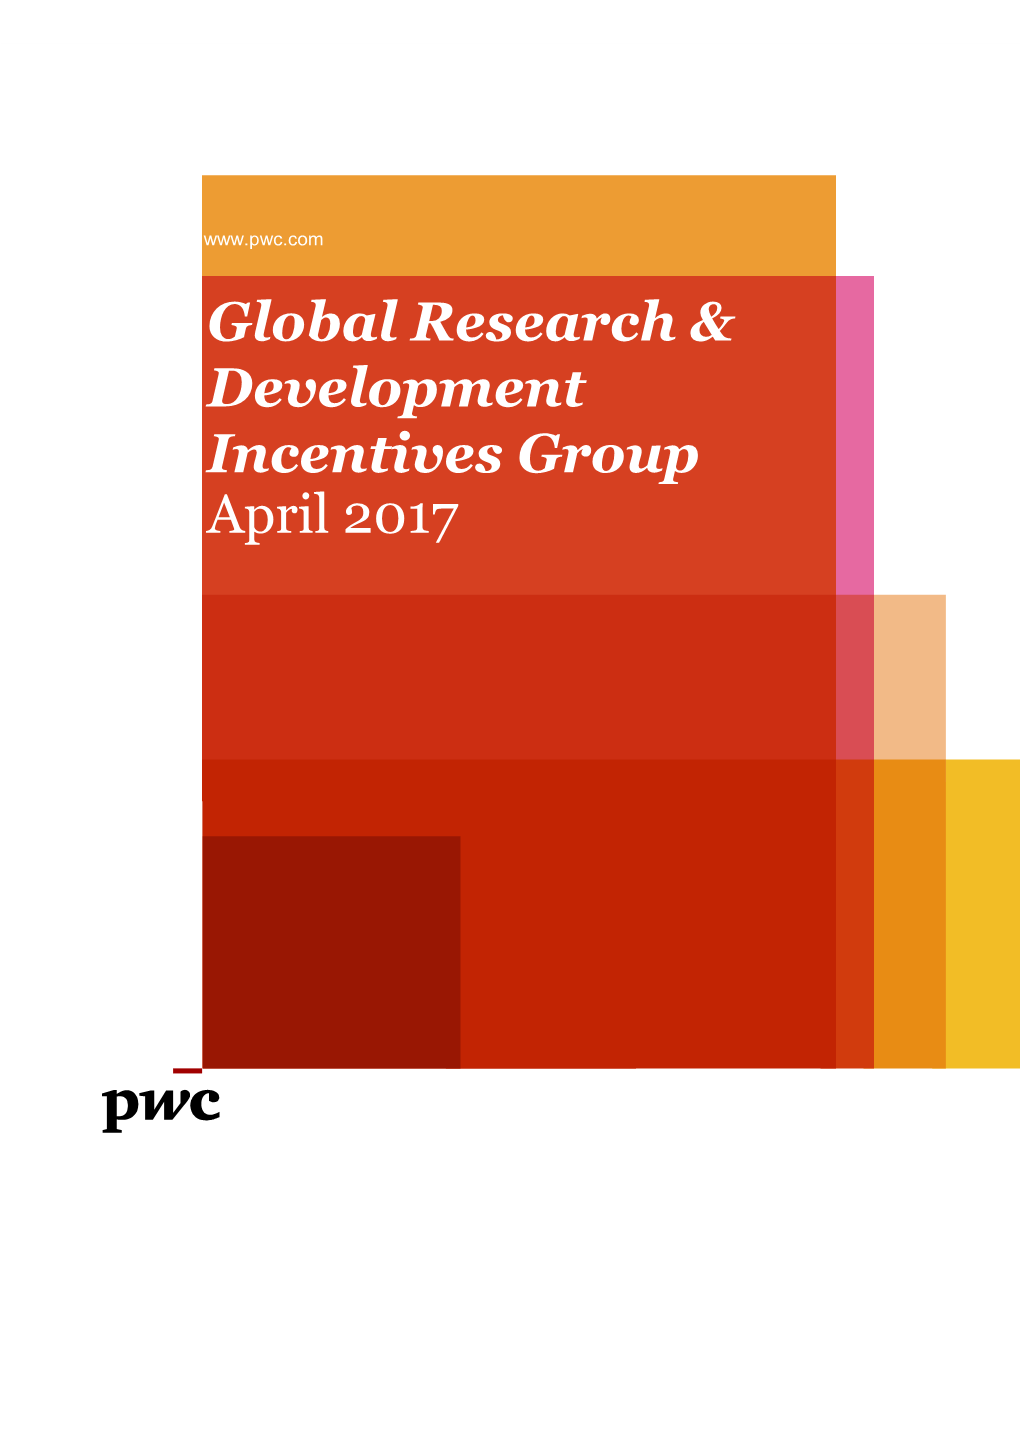 Global Research & Development Incentives Group April 2017